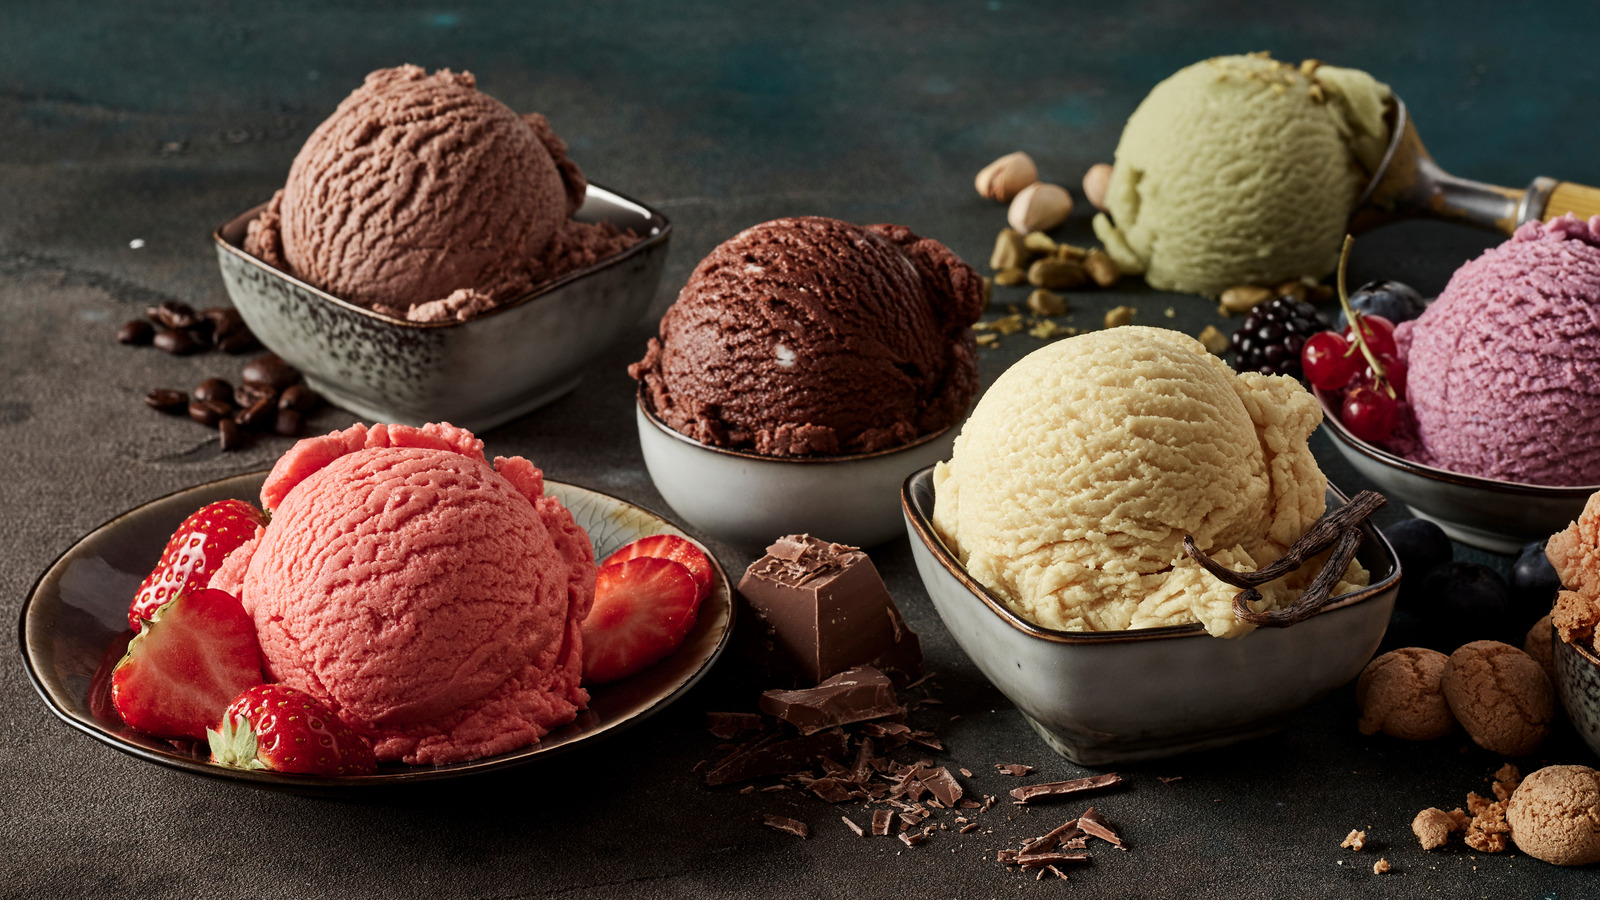 https://www.tastingtable.com/img/gallery/the-ingredient-that-will-change-your-homemade-ice-cream-forever/l-intro-1648063272.jpg